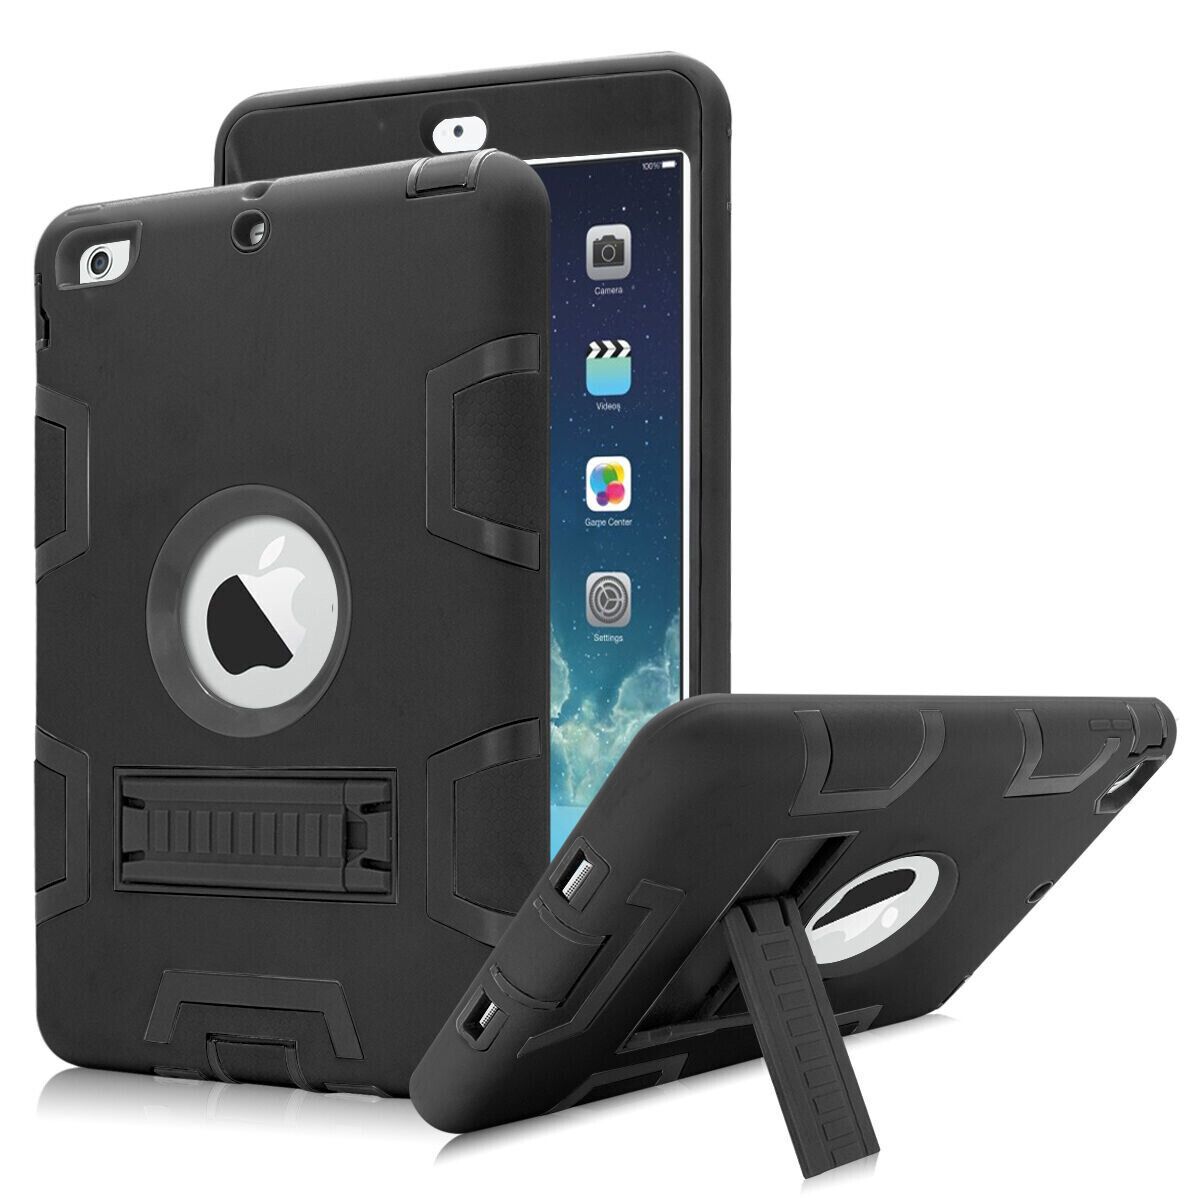 Shockproof Hard Plastic Rubber Cover Case Stand for Apple iPad Mini 1 / 2 / 3